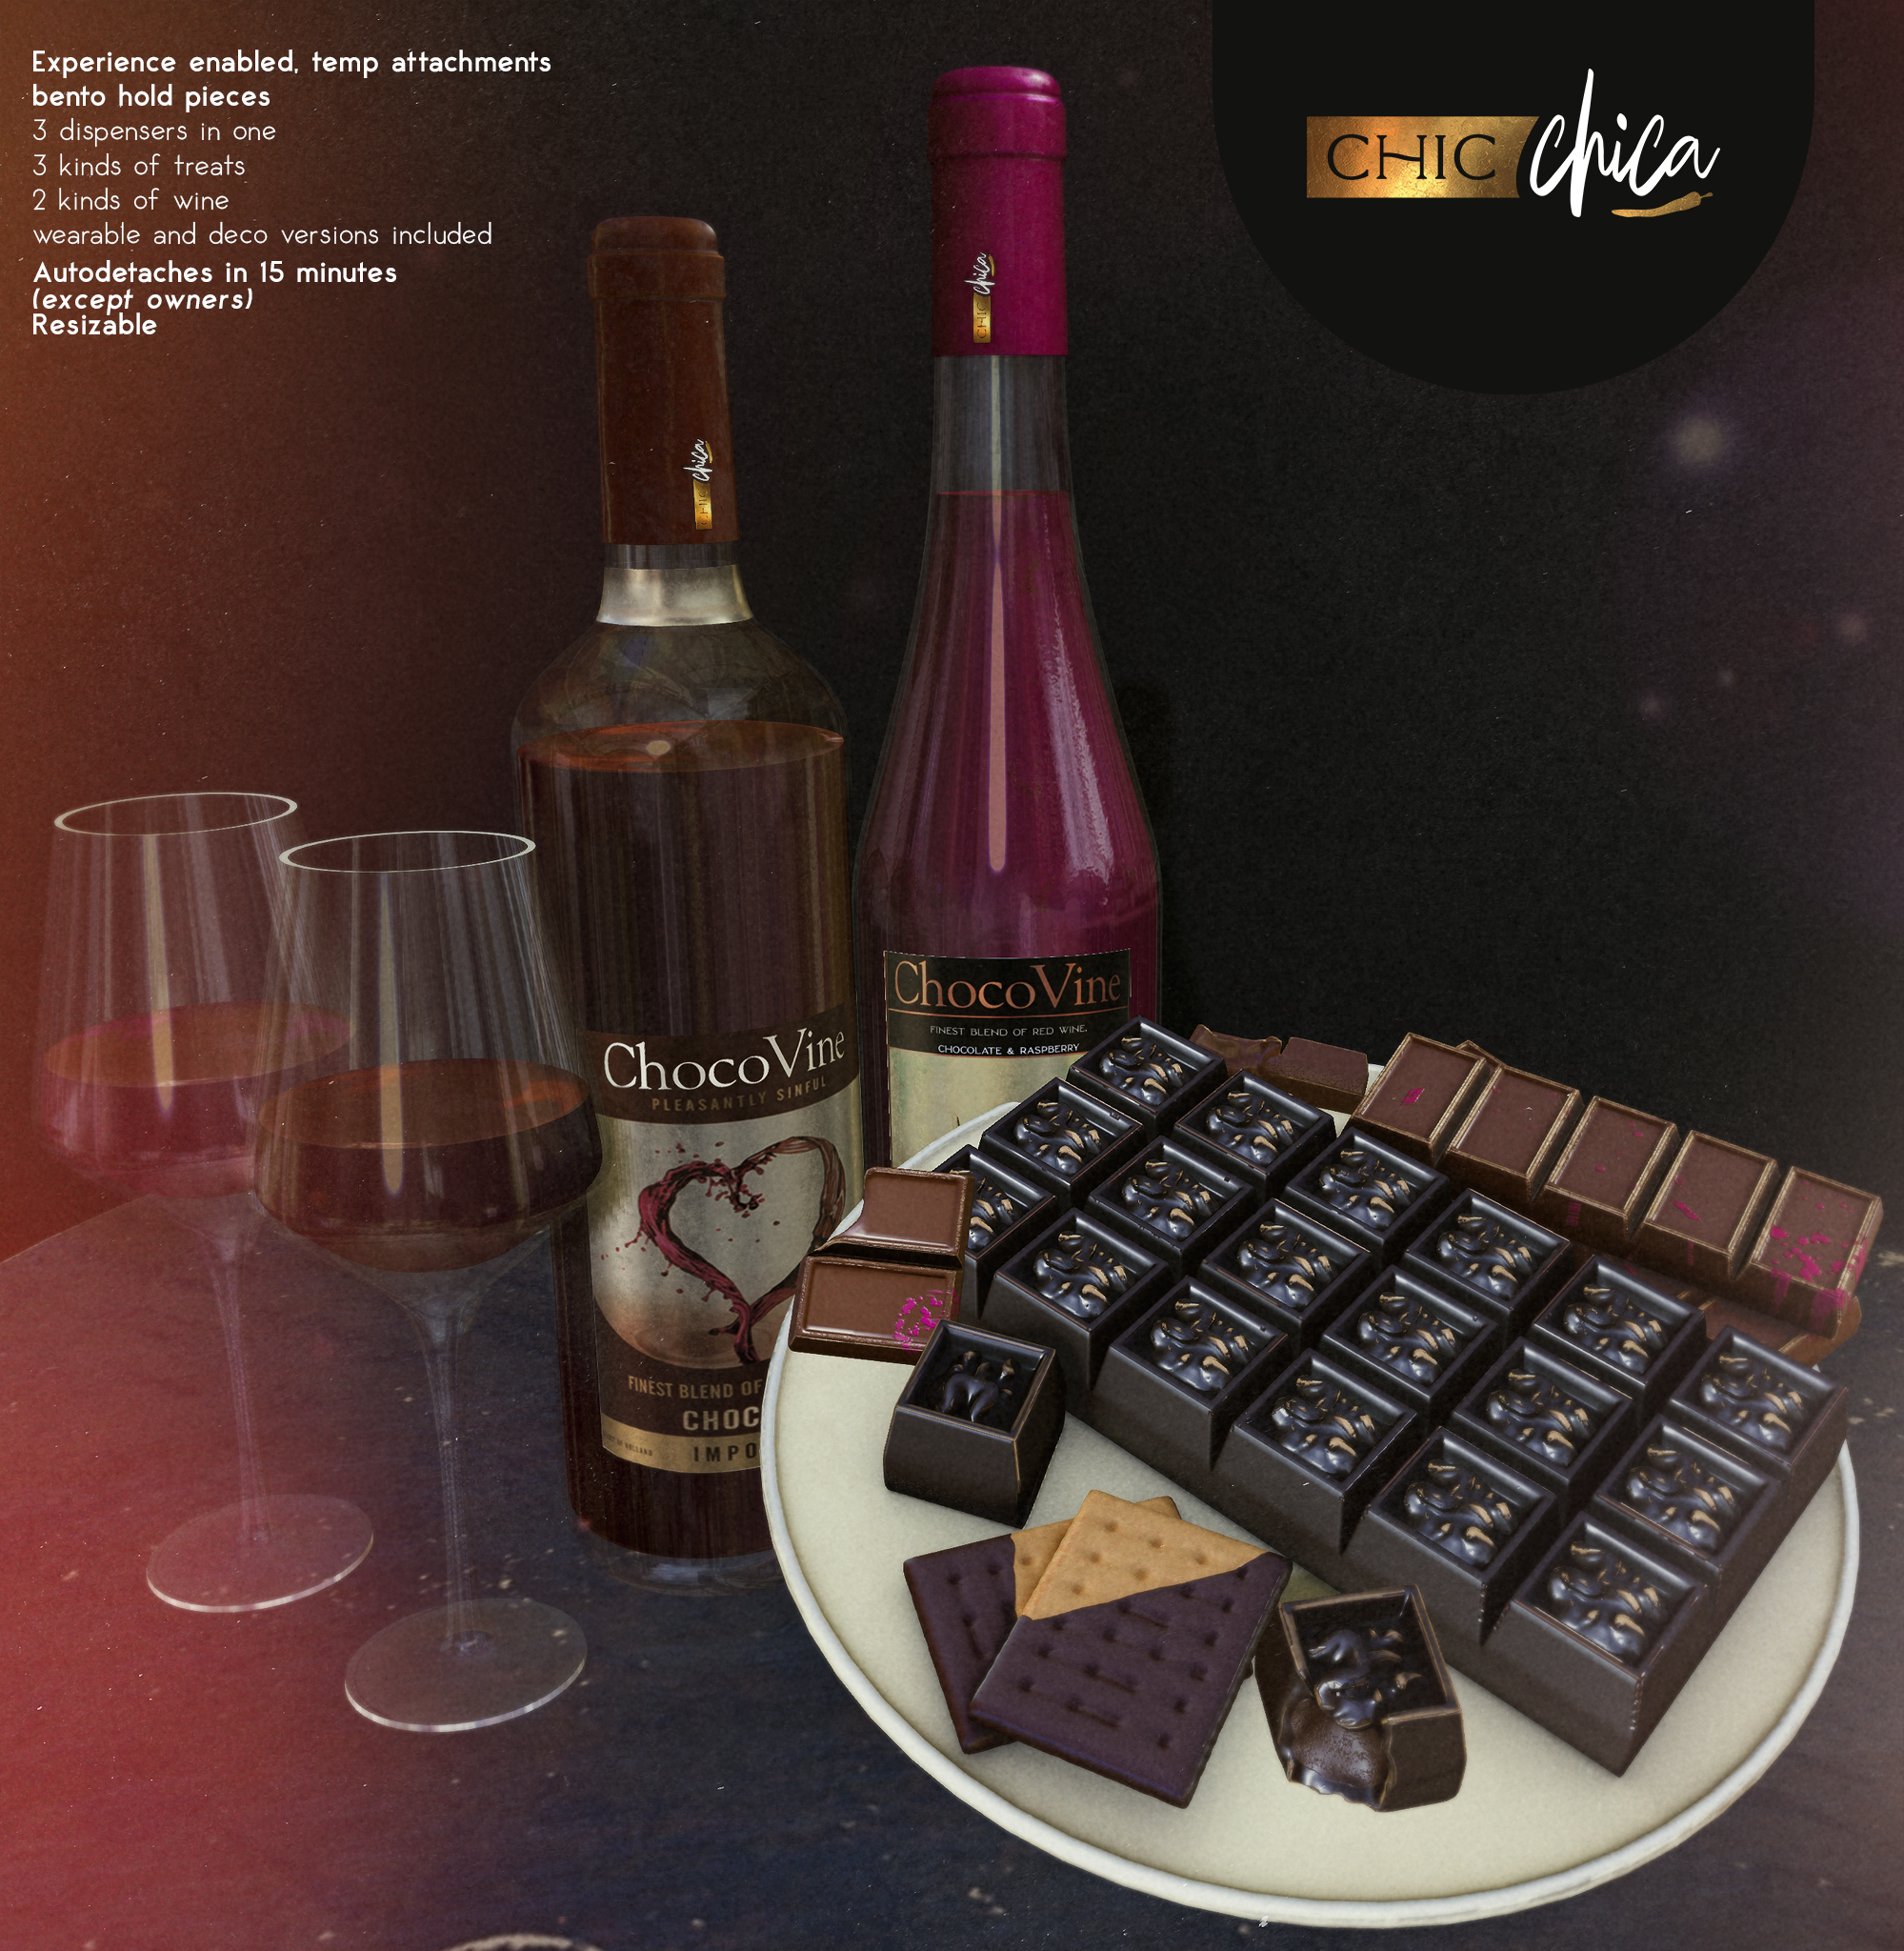 ChicChica – Choco Wines and Treats